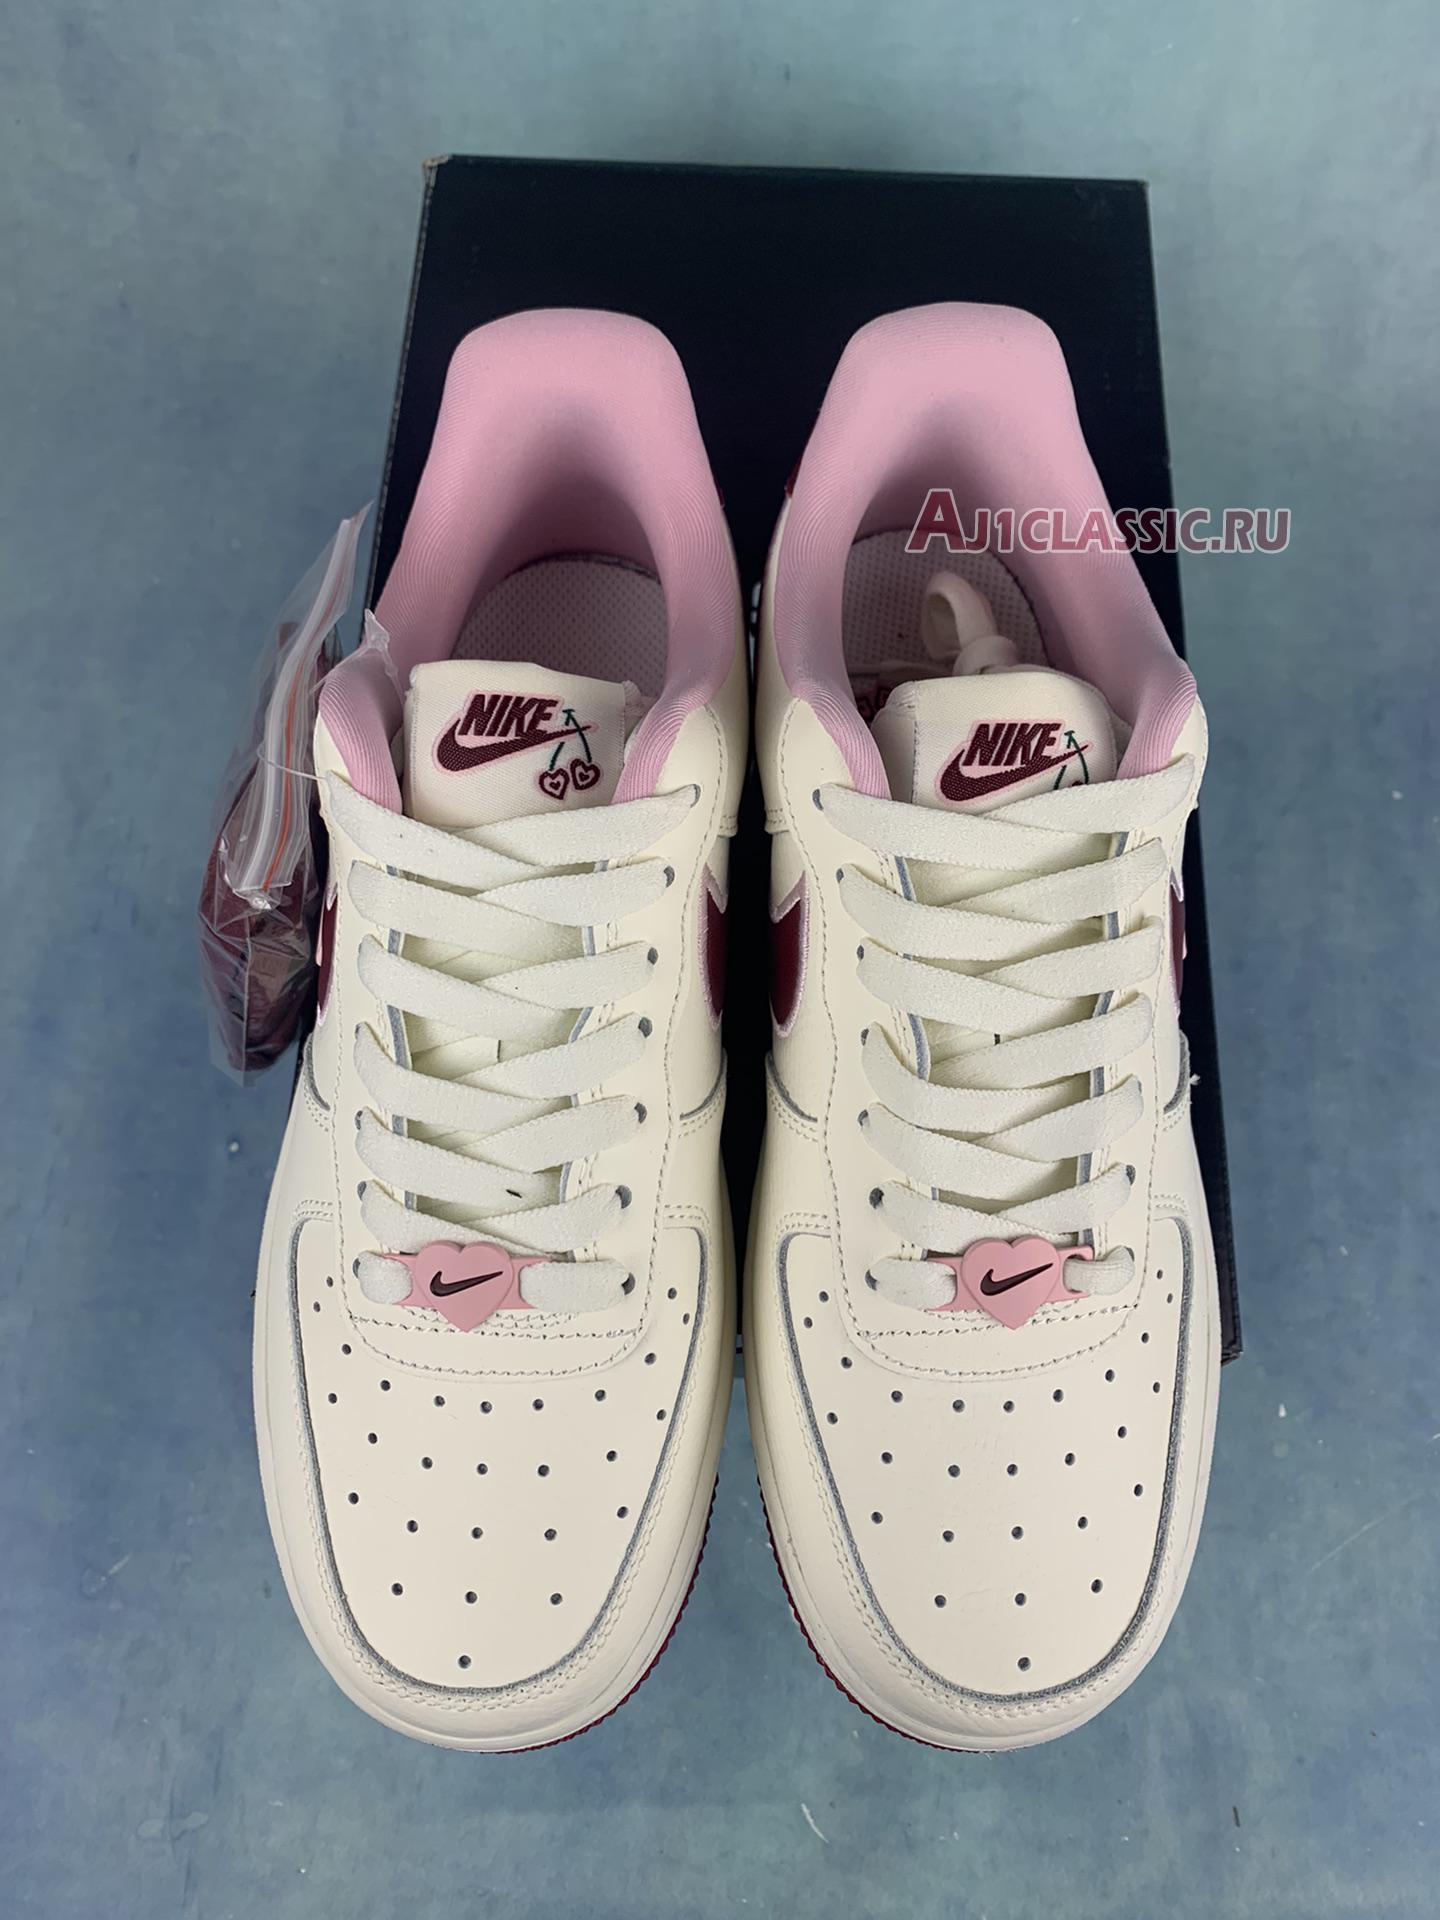 Nike Air Force 1 Low "Valentines Day 2023" FD4616-161